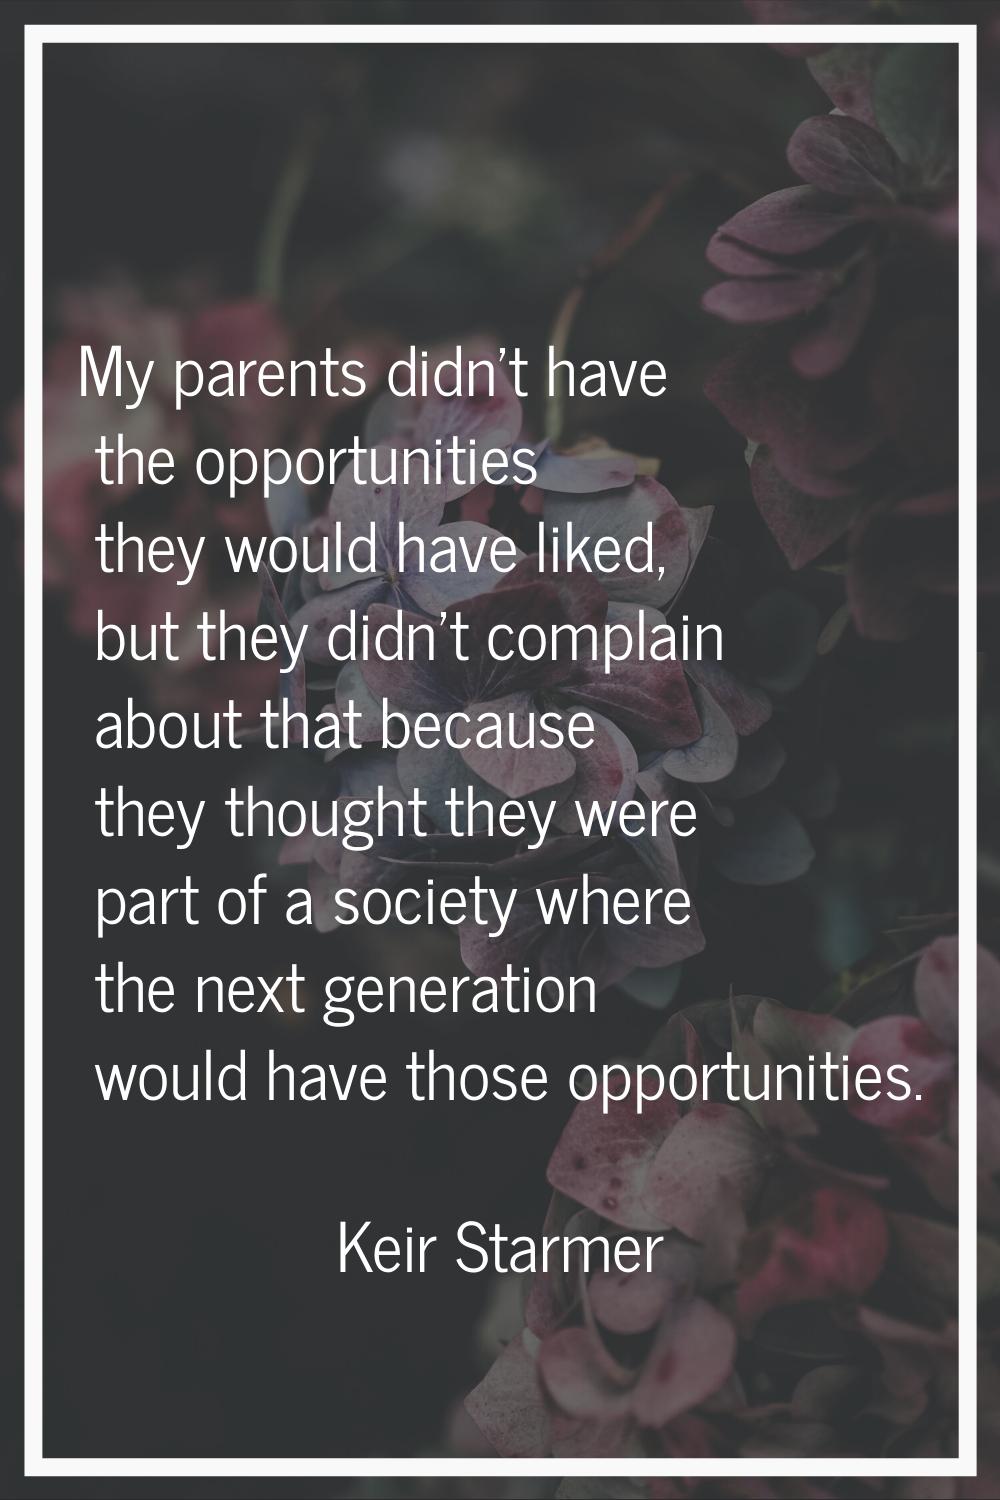 My parents didn't have the opportunities they would have liked, but they didn't complain about that